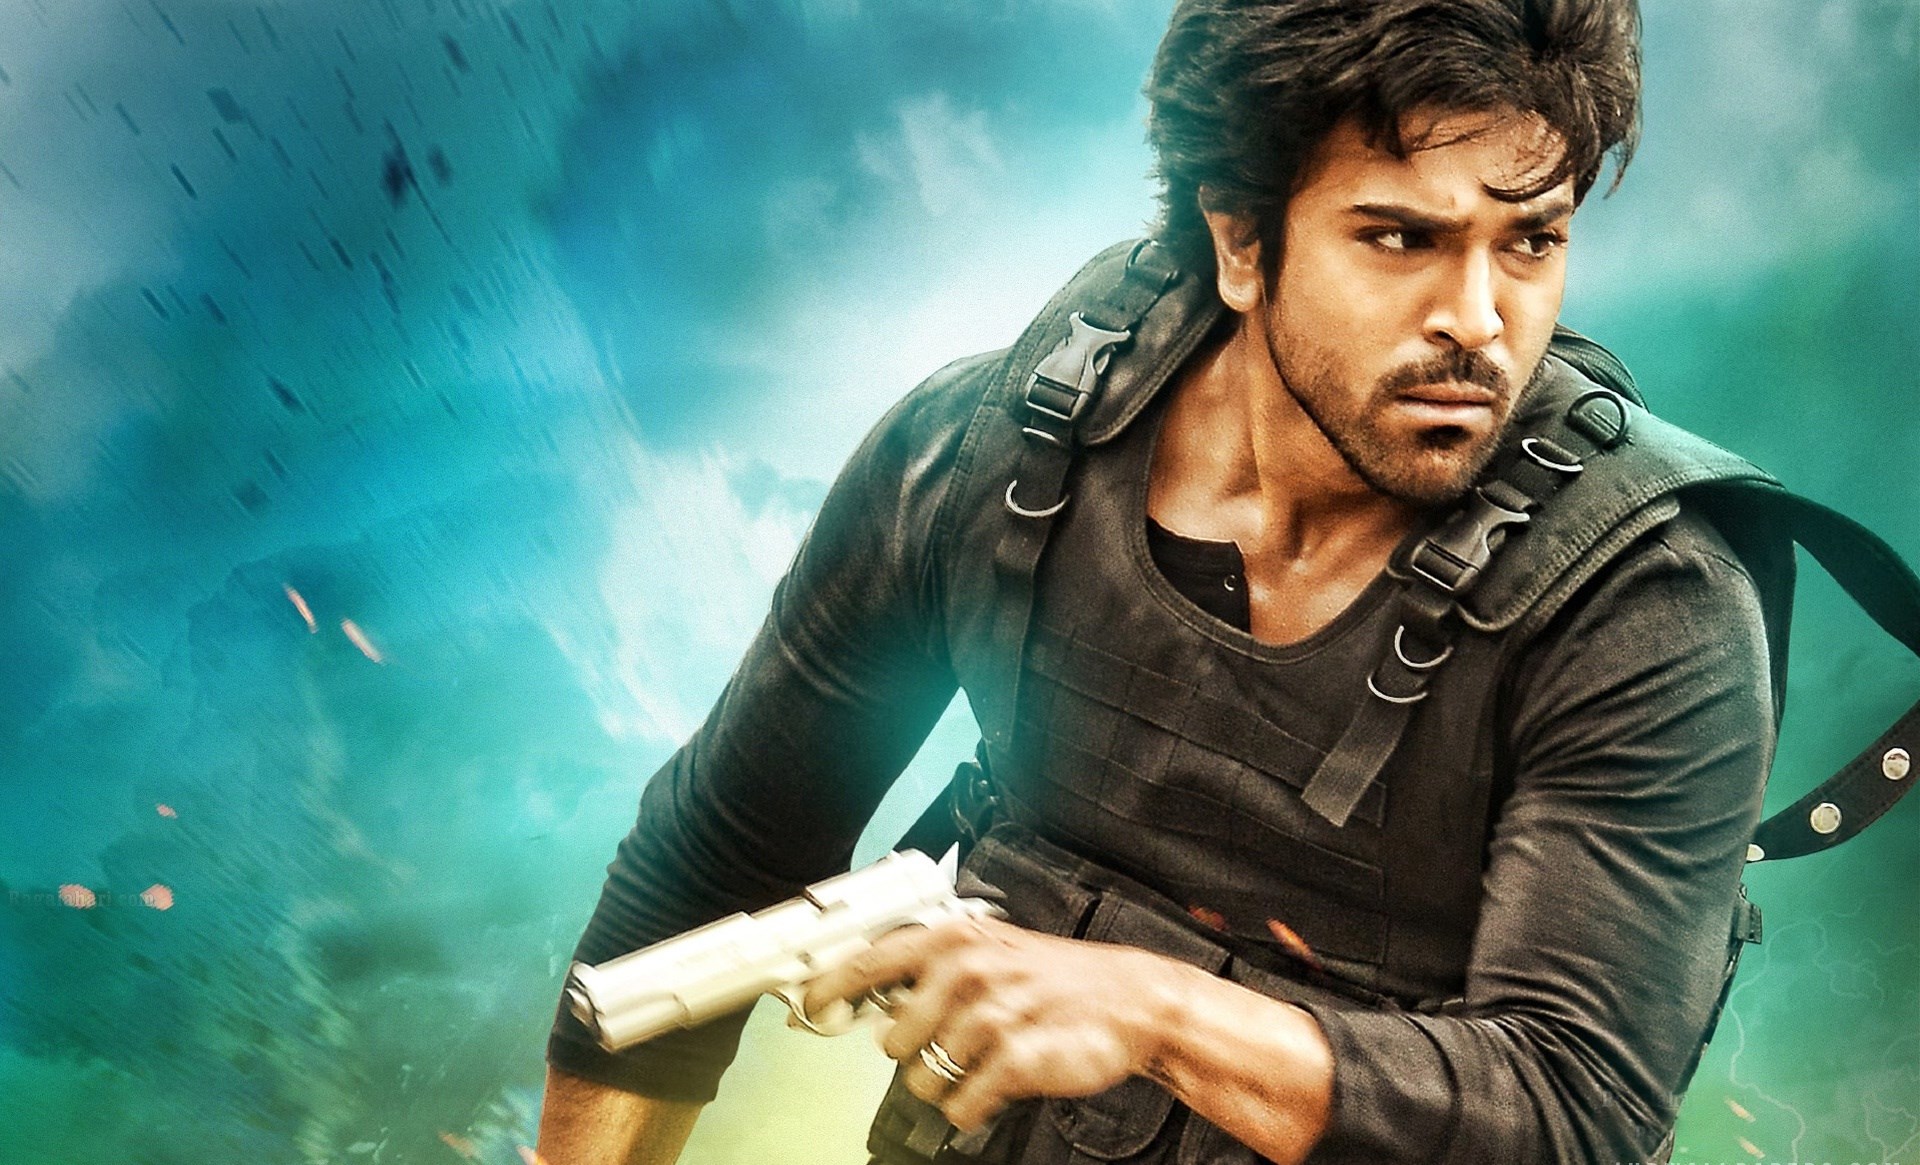 ram charan wallpapers,human,movie,cool,action film